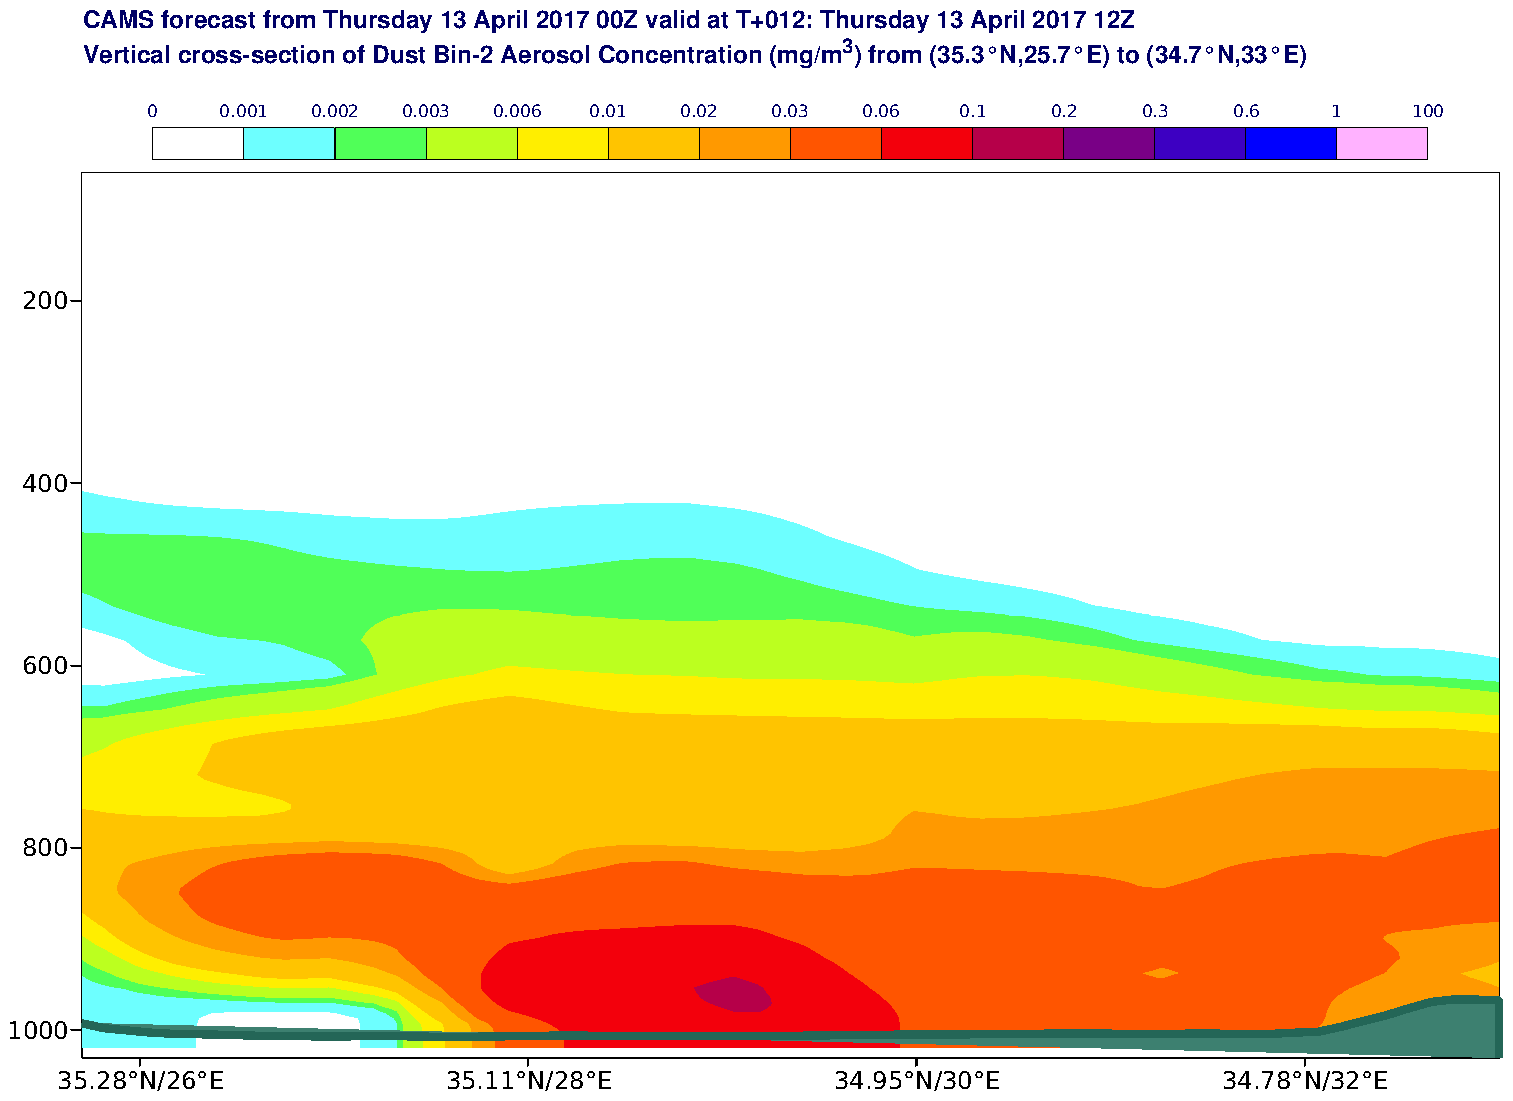 Vertical cross-section of Dust Bin-2 Aerosol Concentration (mg/m3) valid at T12 - 2017-04-13 12:00